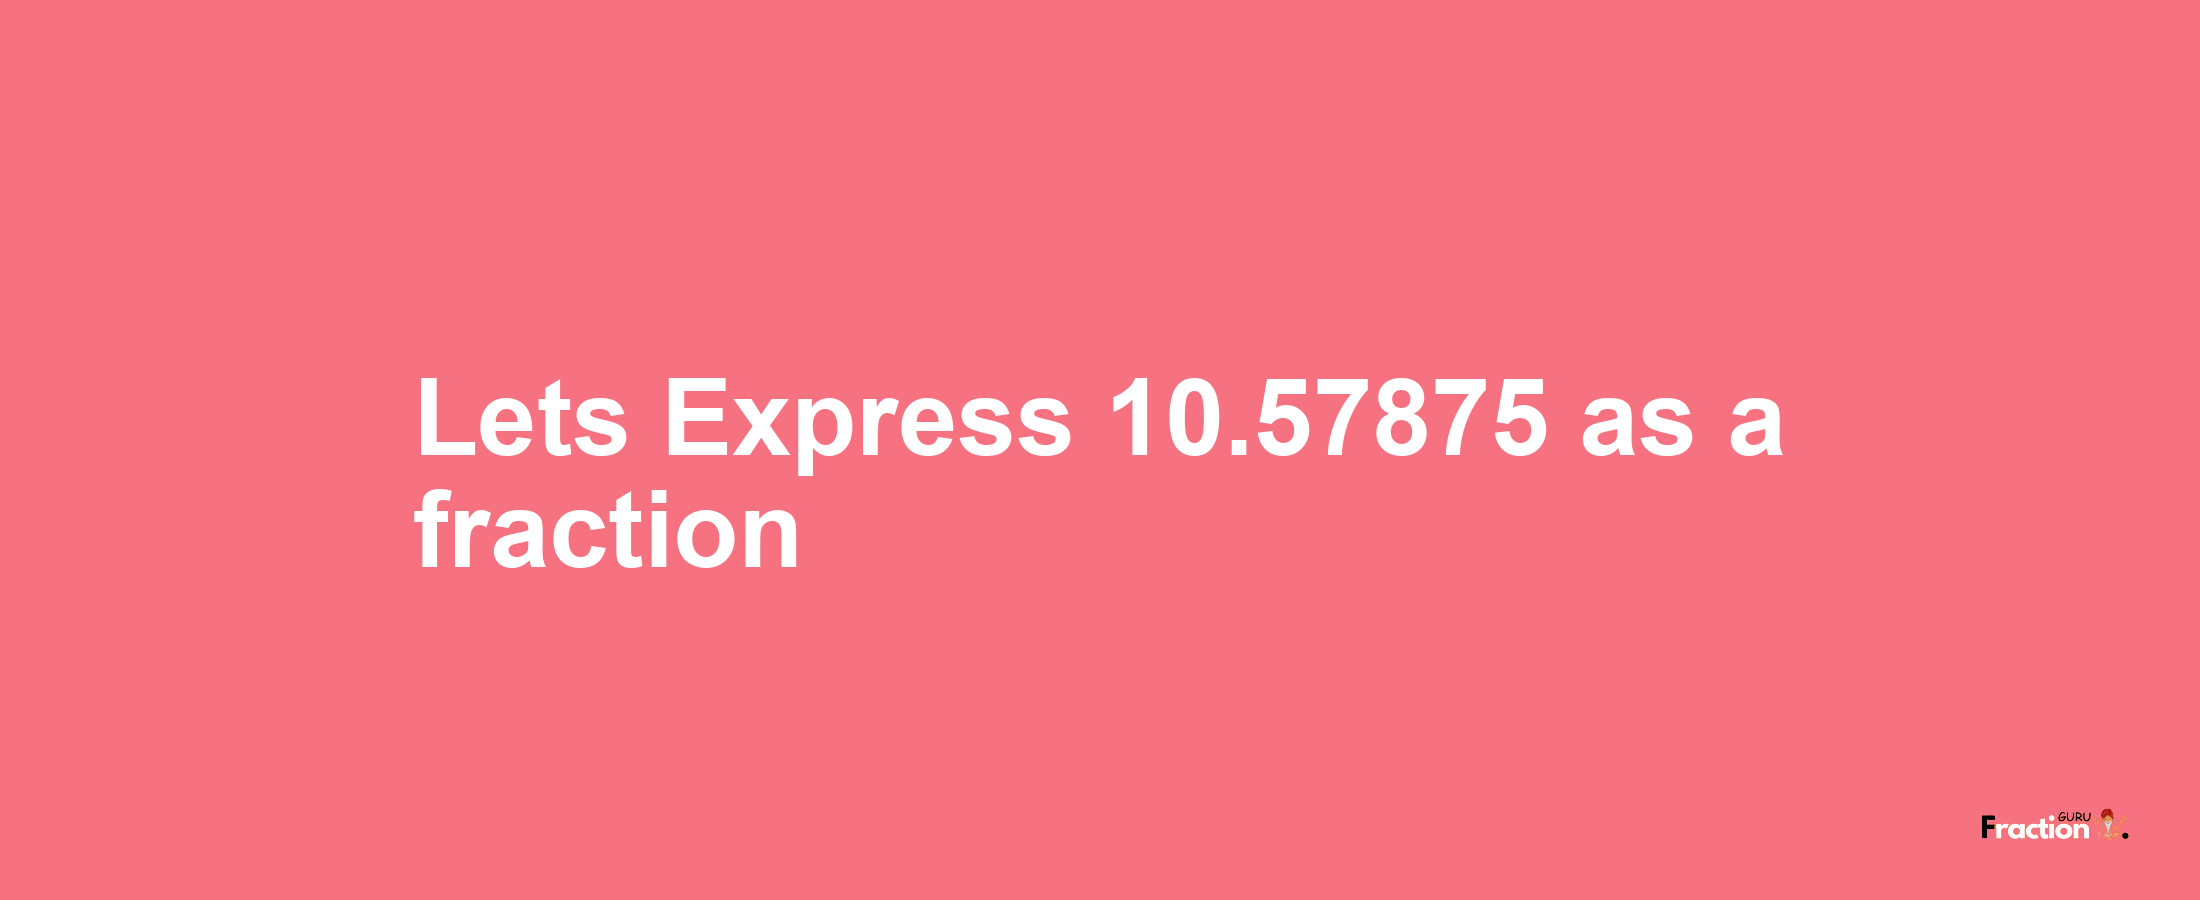 Lets Express 10.57875 as afraction